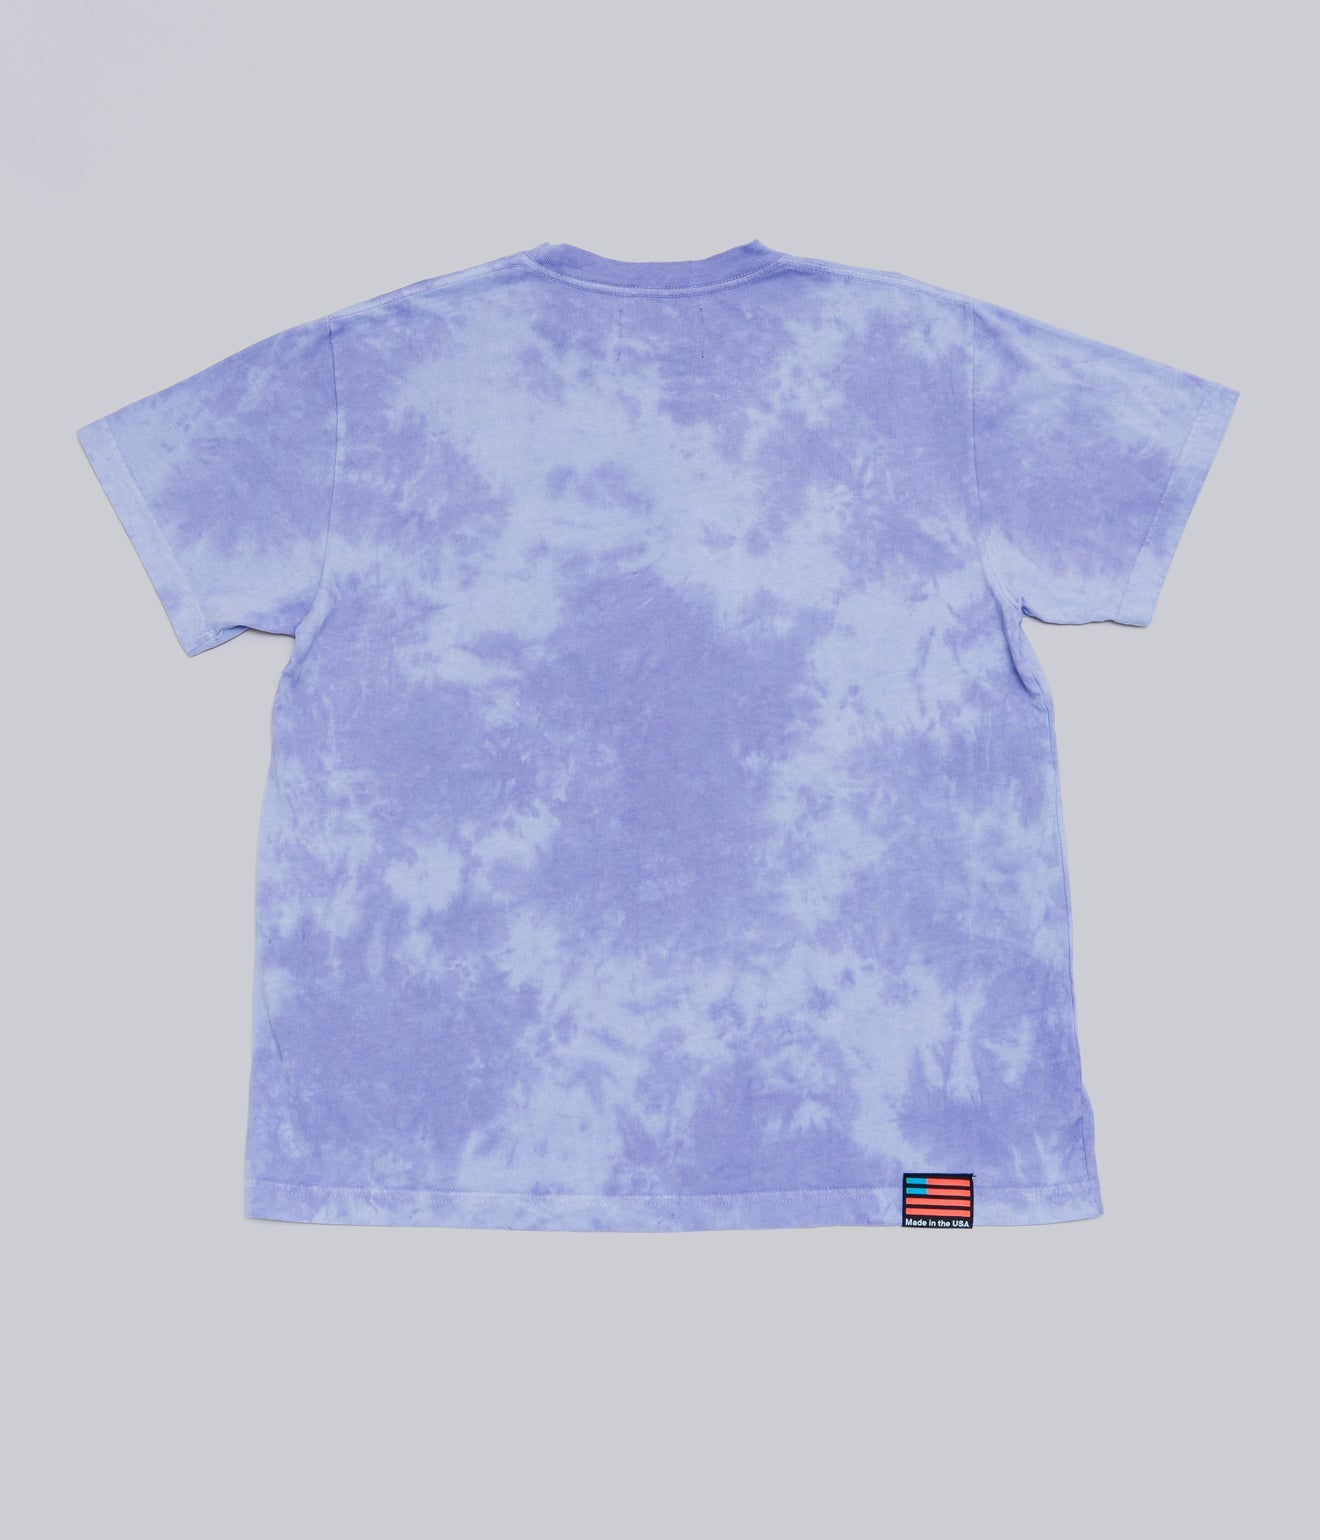 LITE YEAR "Short Sleeve Pocket Tee" Cloudy Washed Lavender - WEAREALLANIMALS